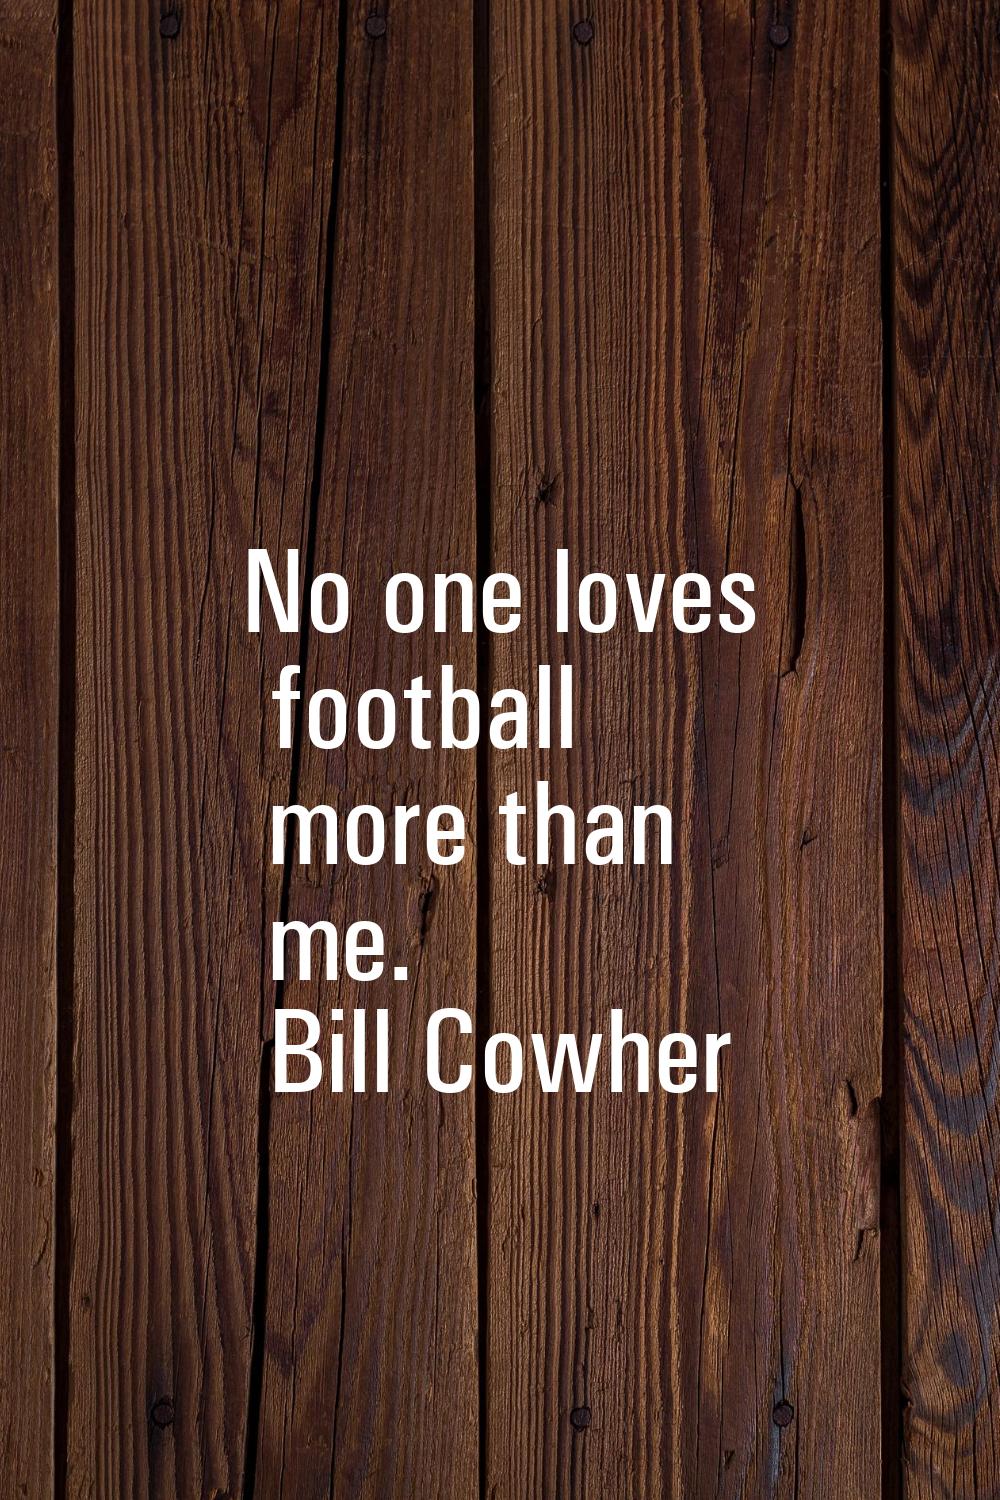 No one loves football more than me.